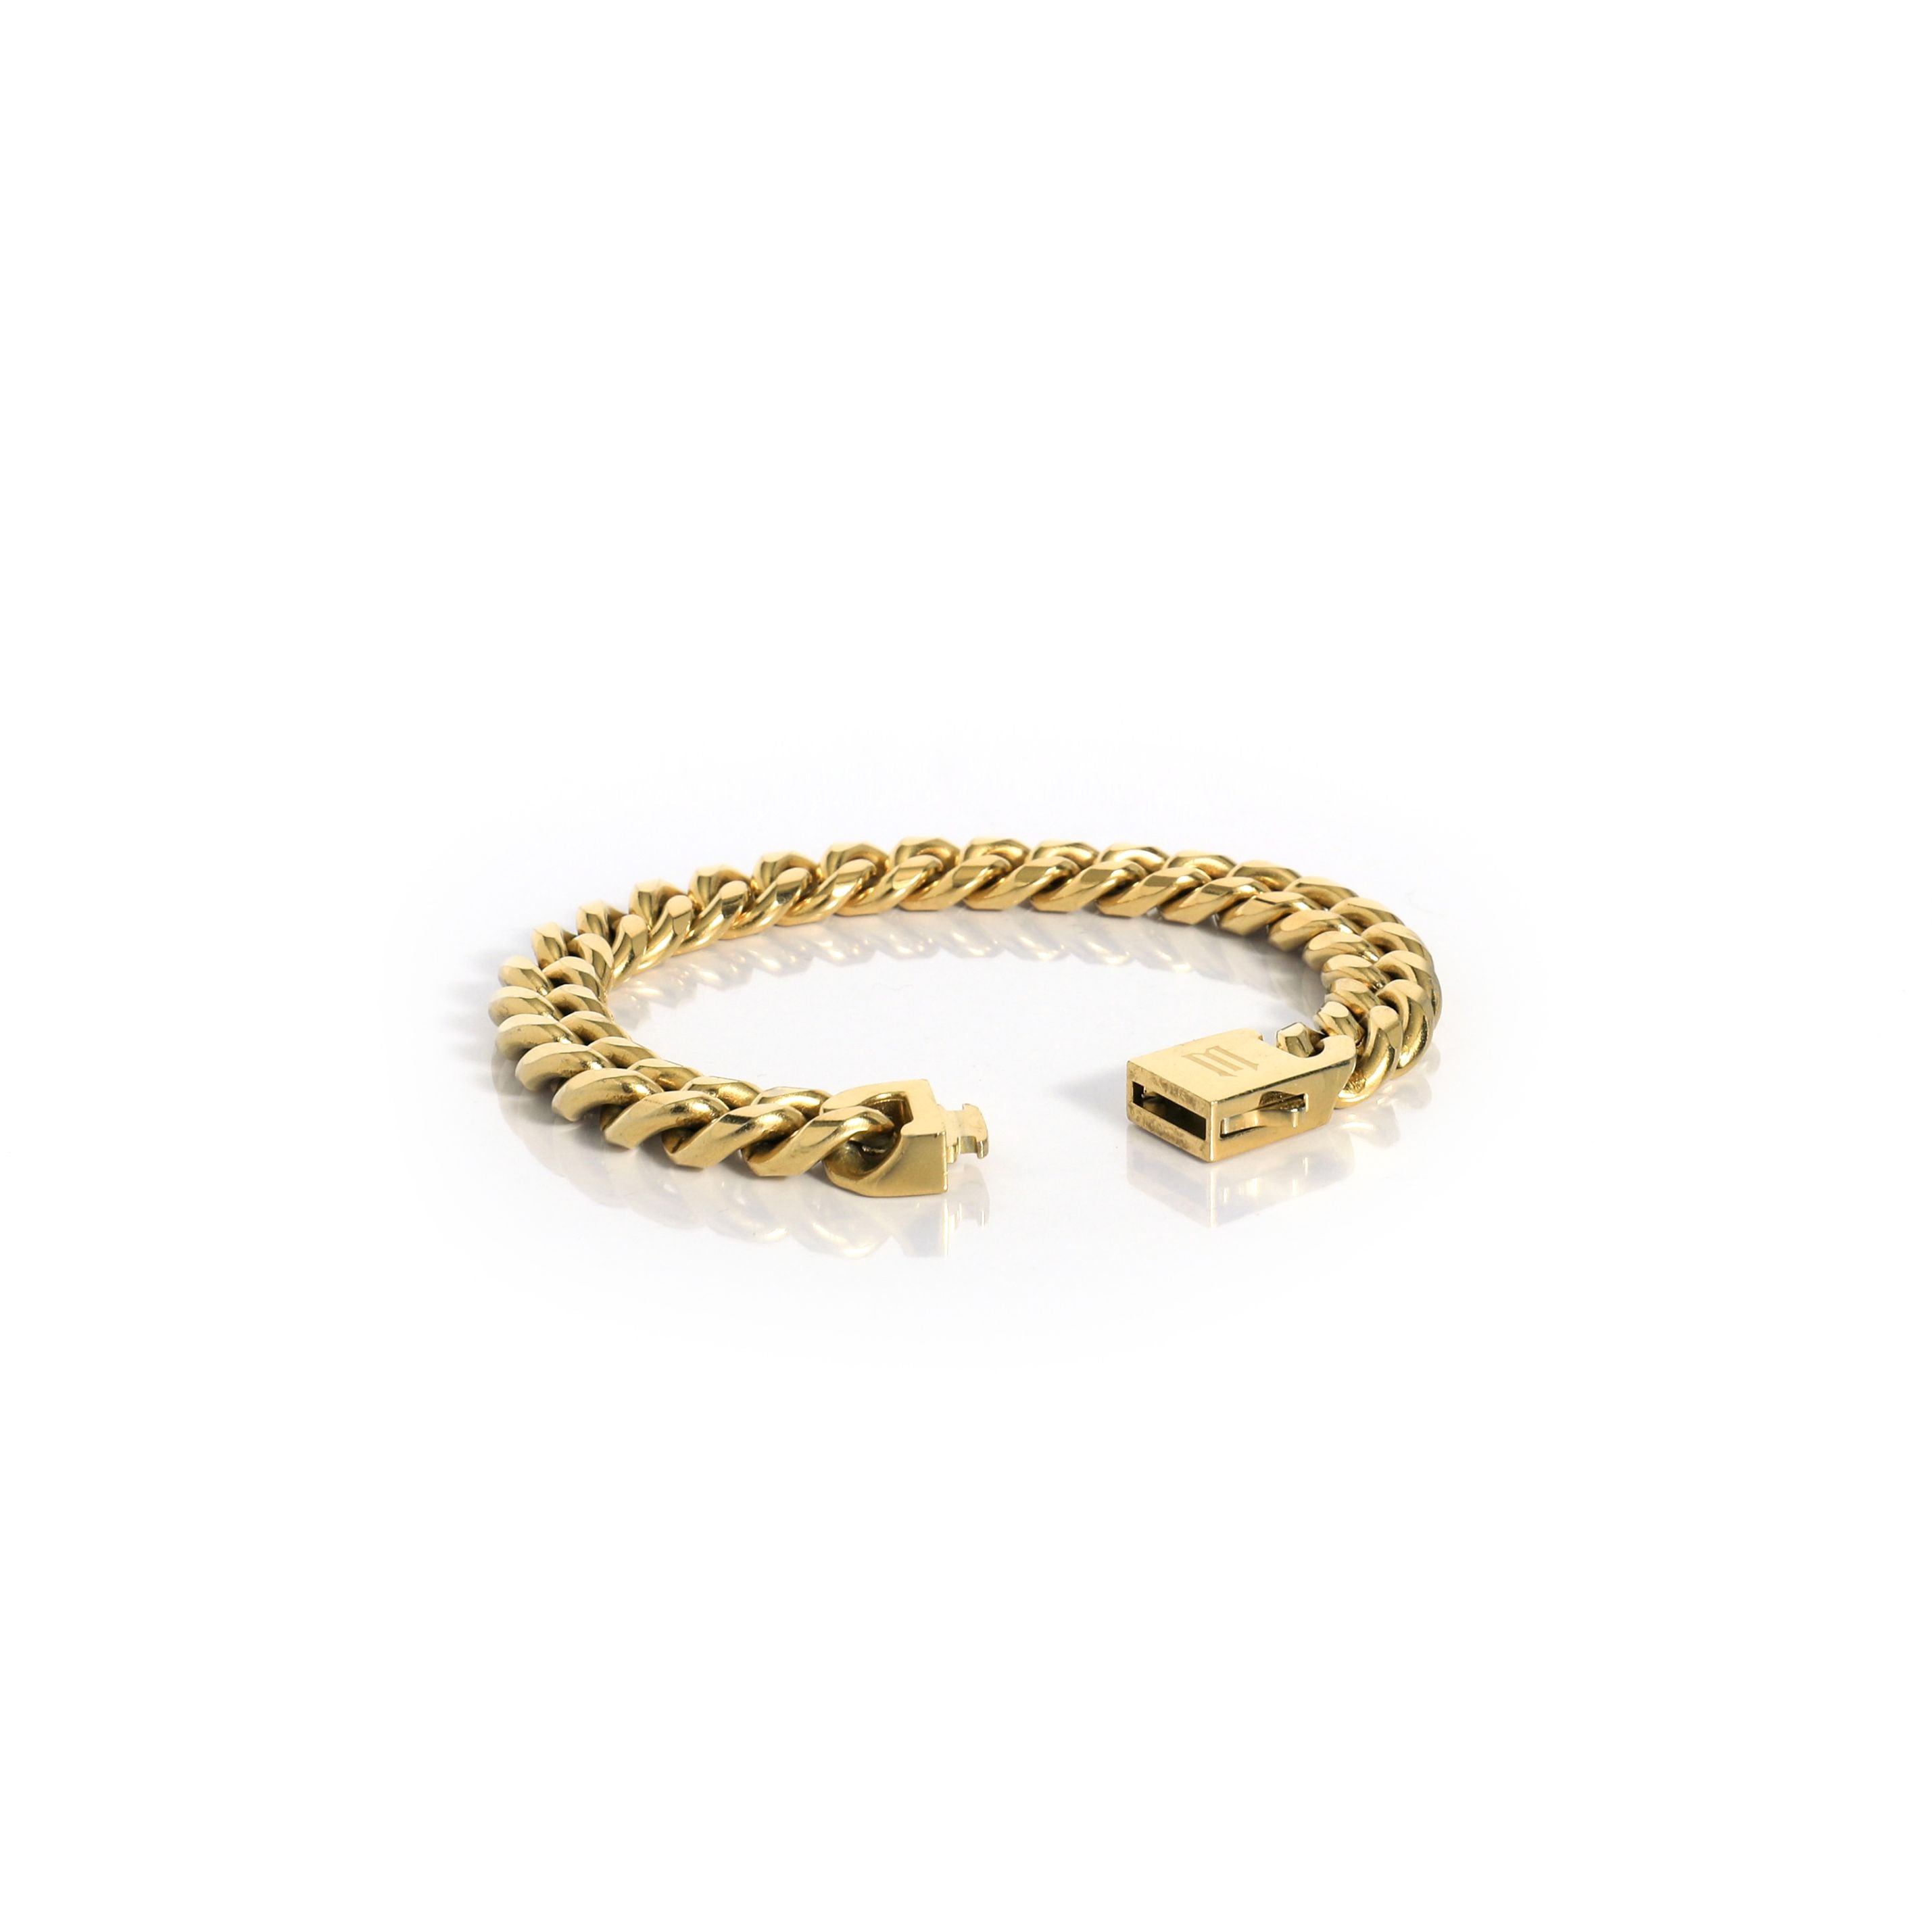 Gold Cuban Link Bracelet, product detail with clasp open